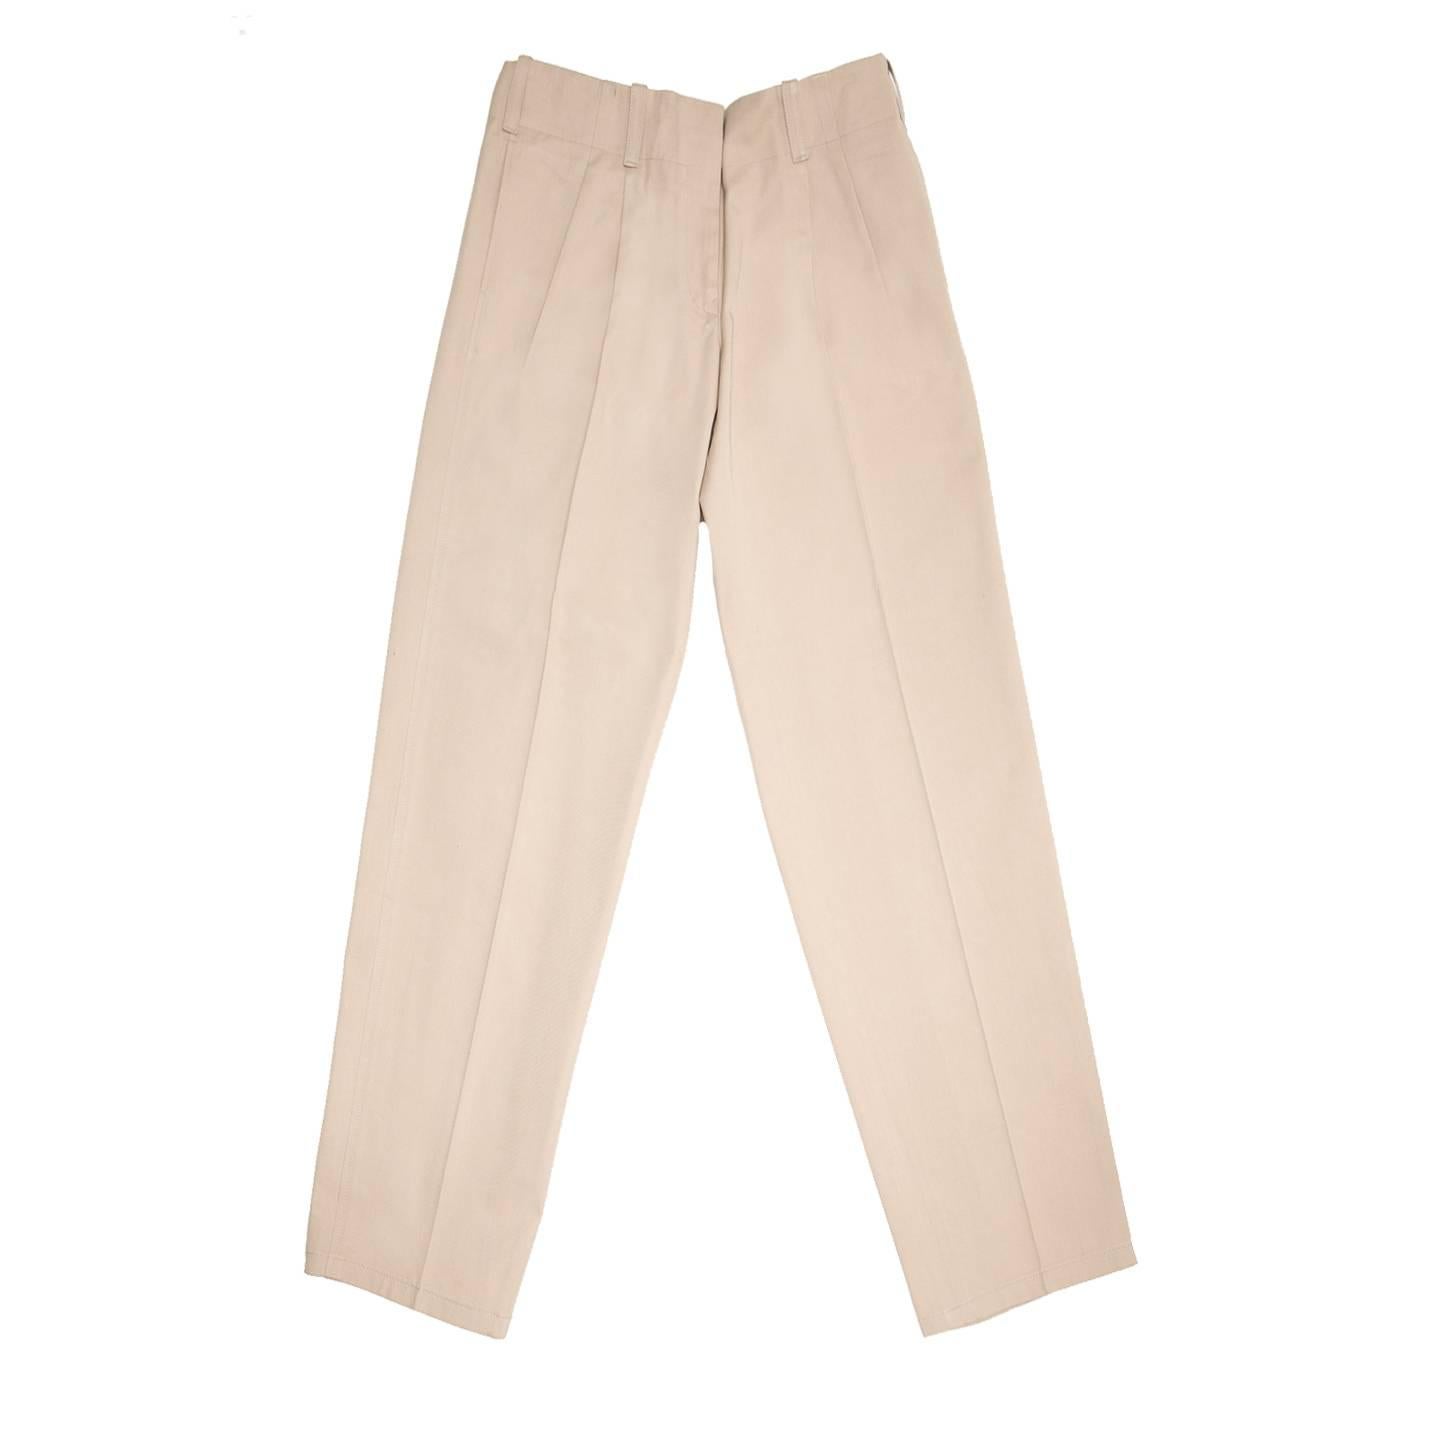 Khaki thick cotton trousers with a man's style. The pants are suit pleated, they have pleats at front waist that open from under the waistband line, slash pockets sit at side seams and slit pockets at back of which only one fastens with tone-on-tone